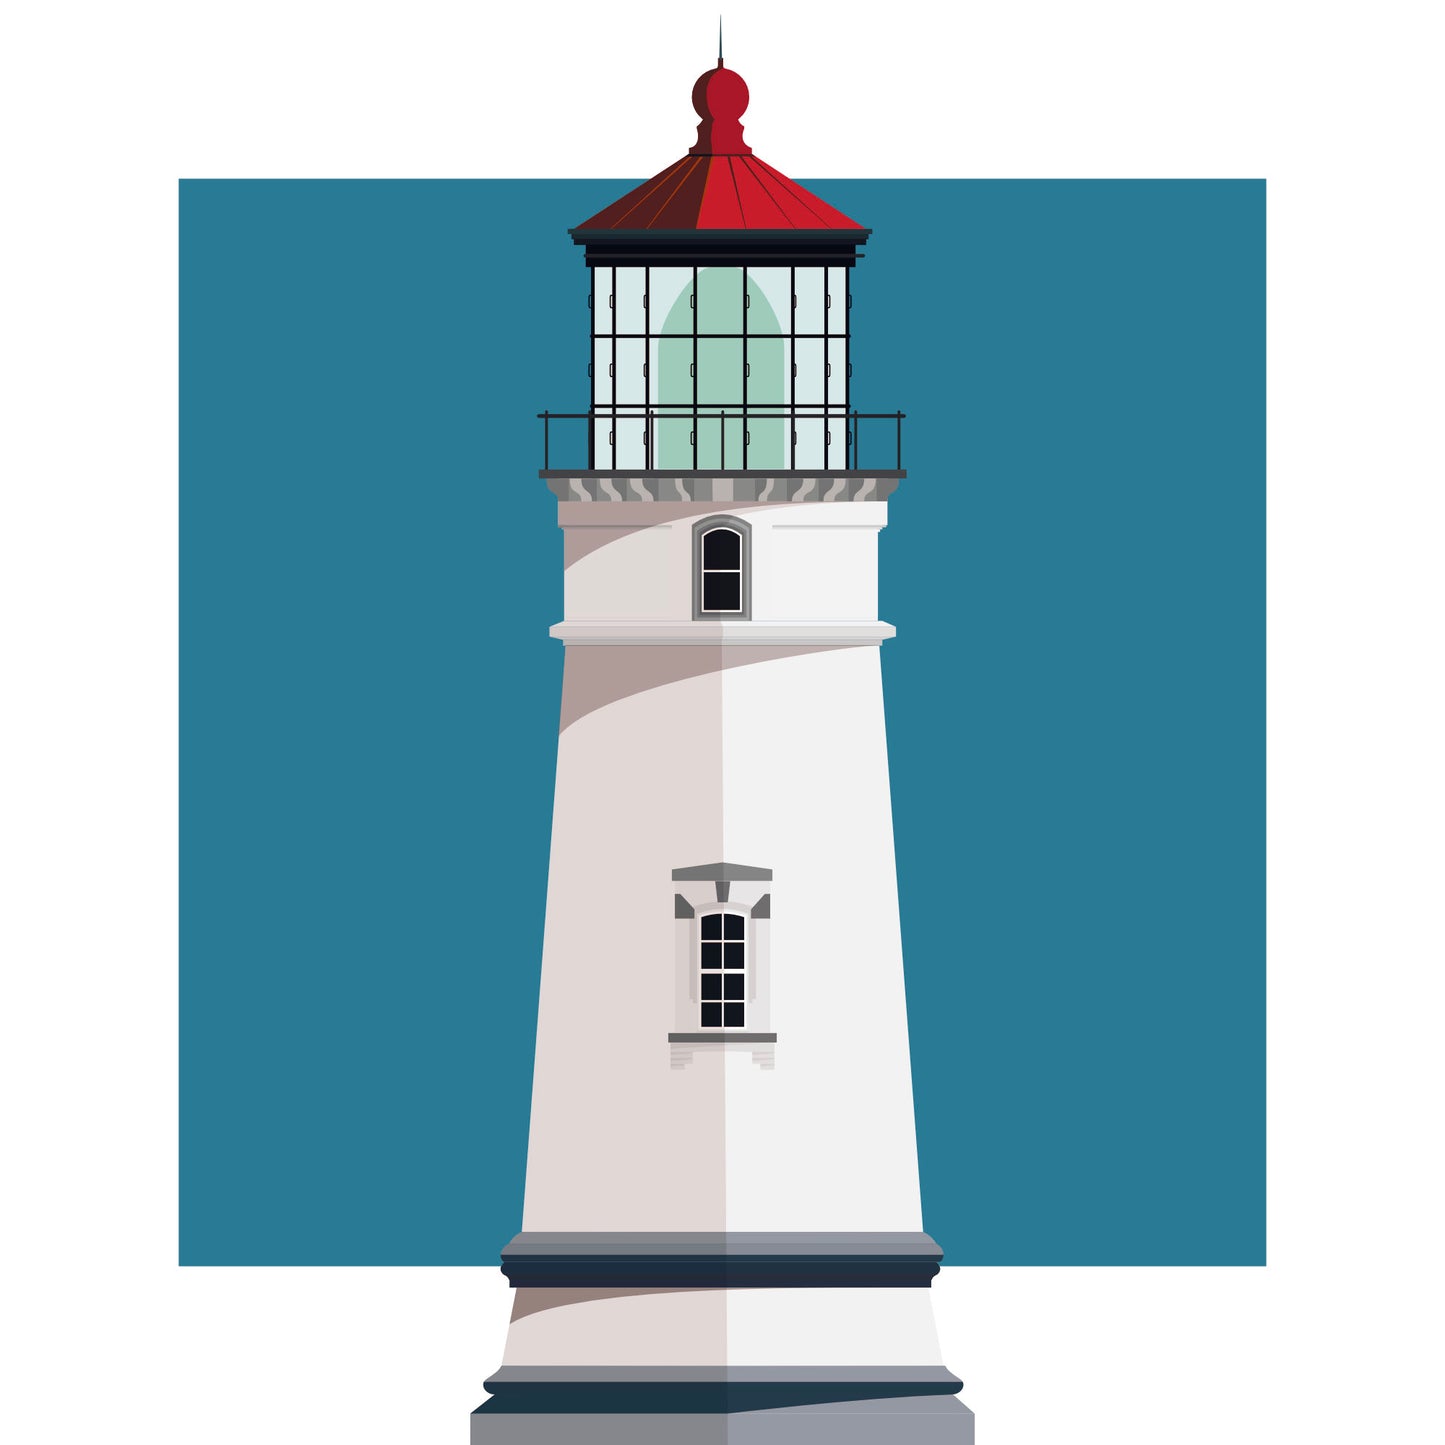 Illustration of the Heceta Head lighthouse, Oregon, USA. On a white background with aqua blue square as a backdrop.